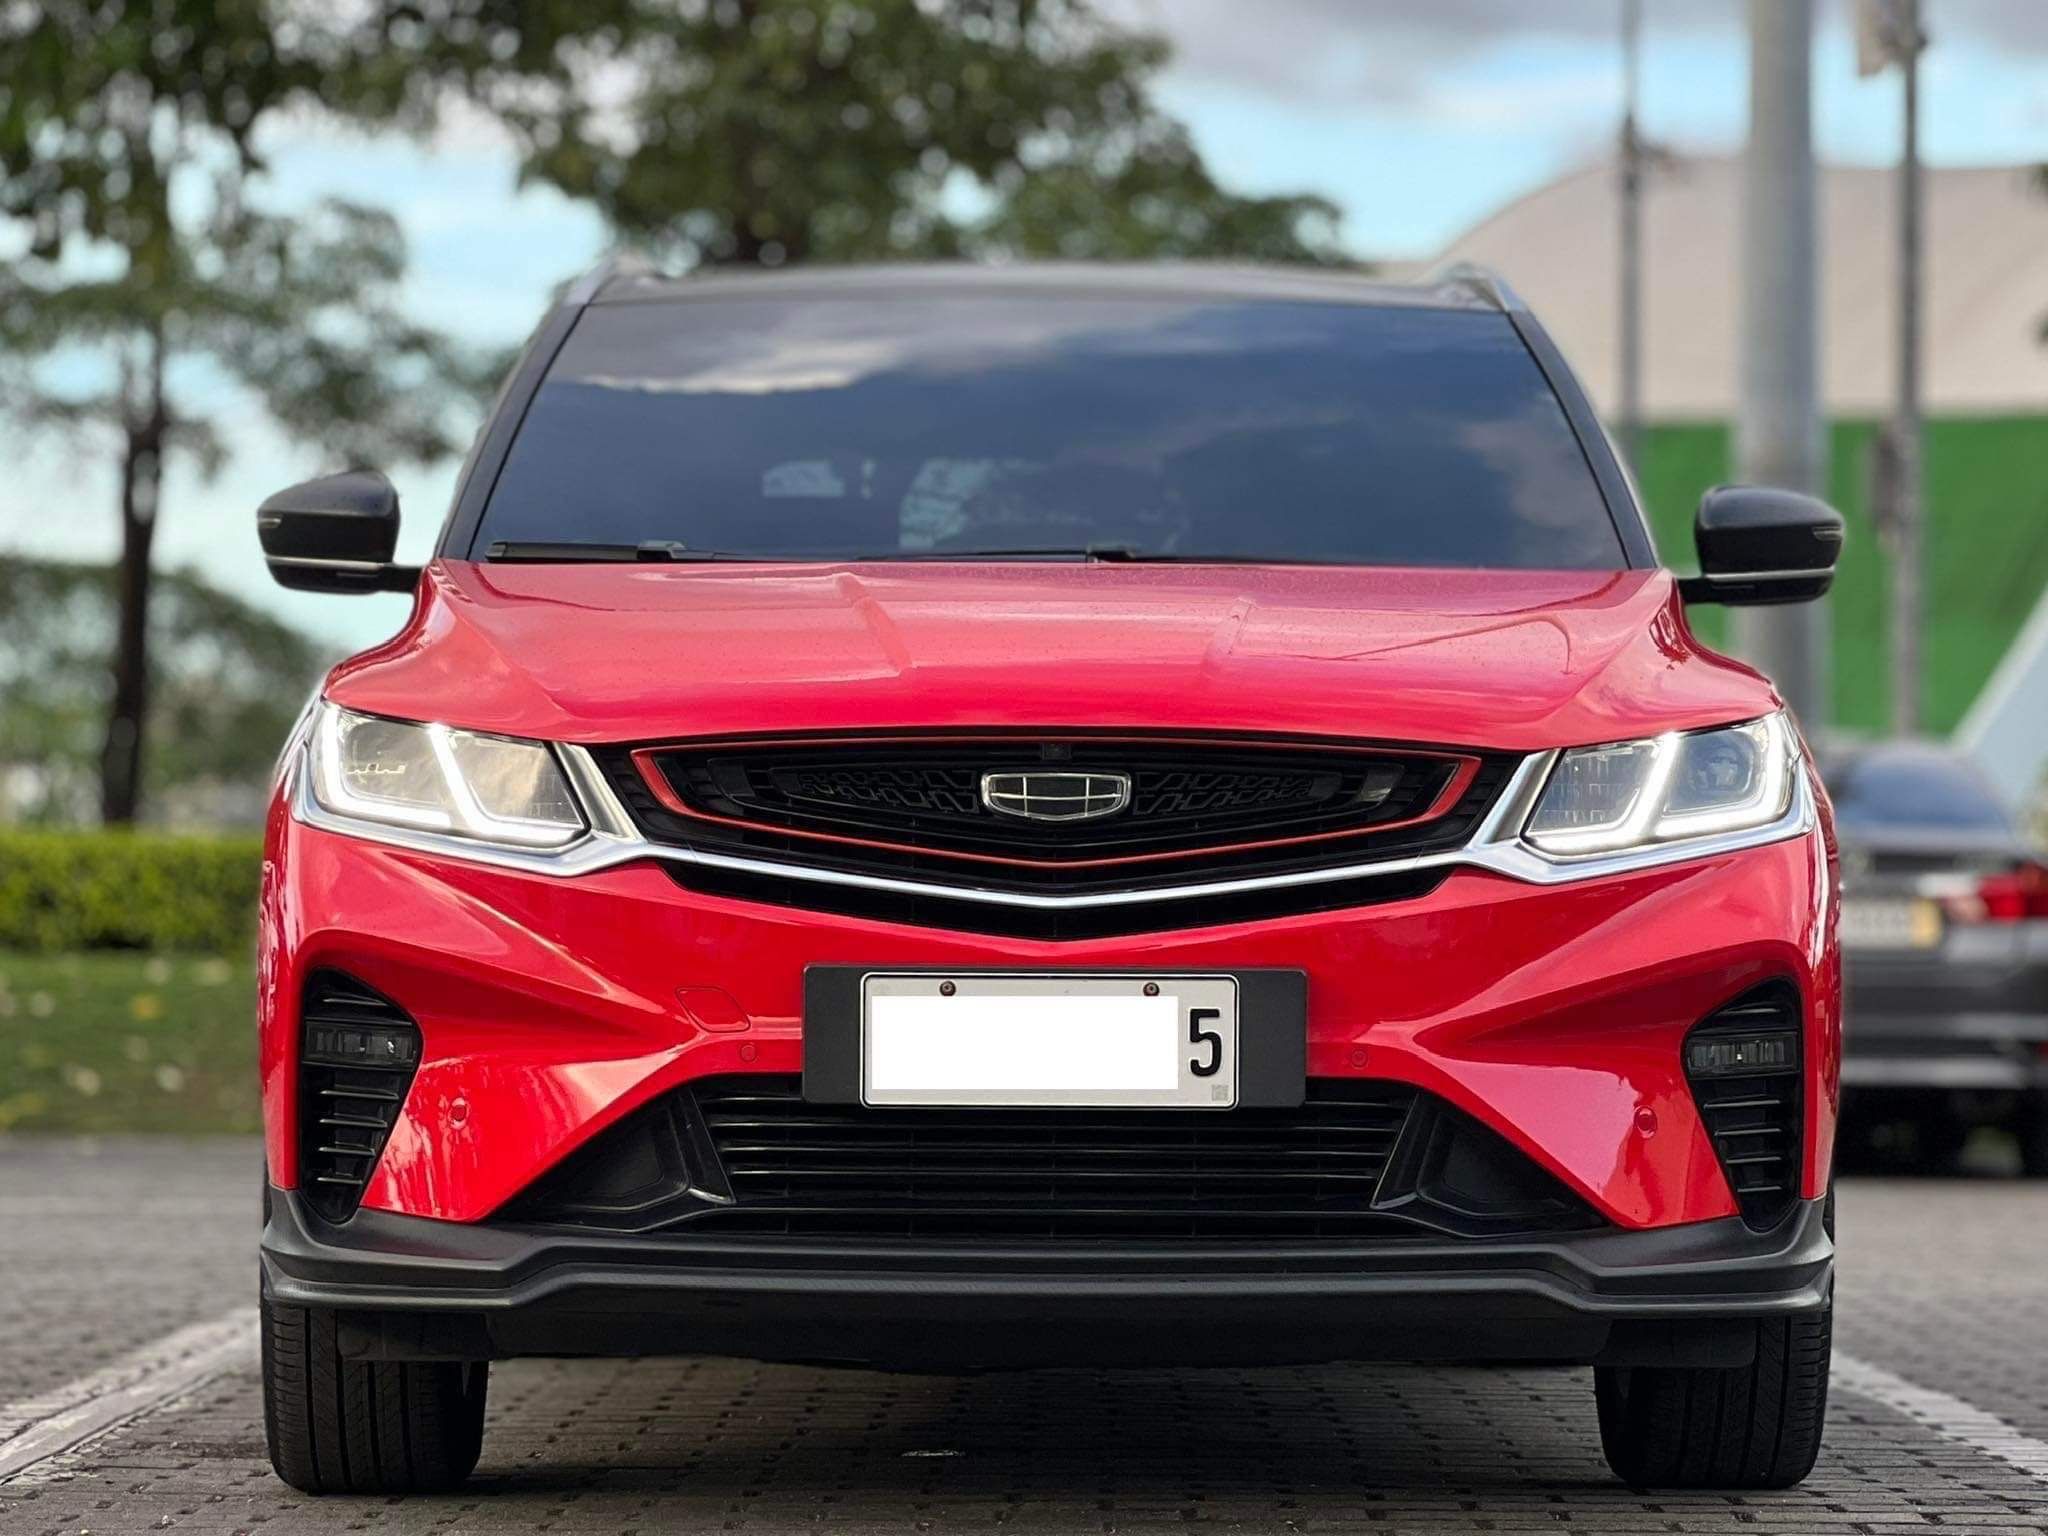 2019 Geely Coolray SE